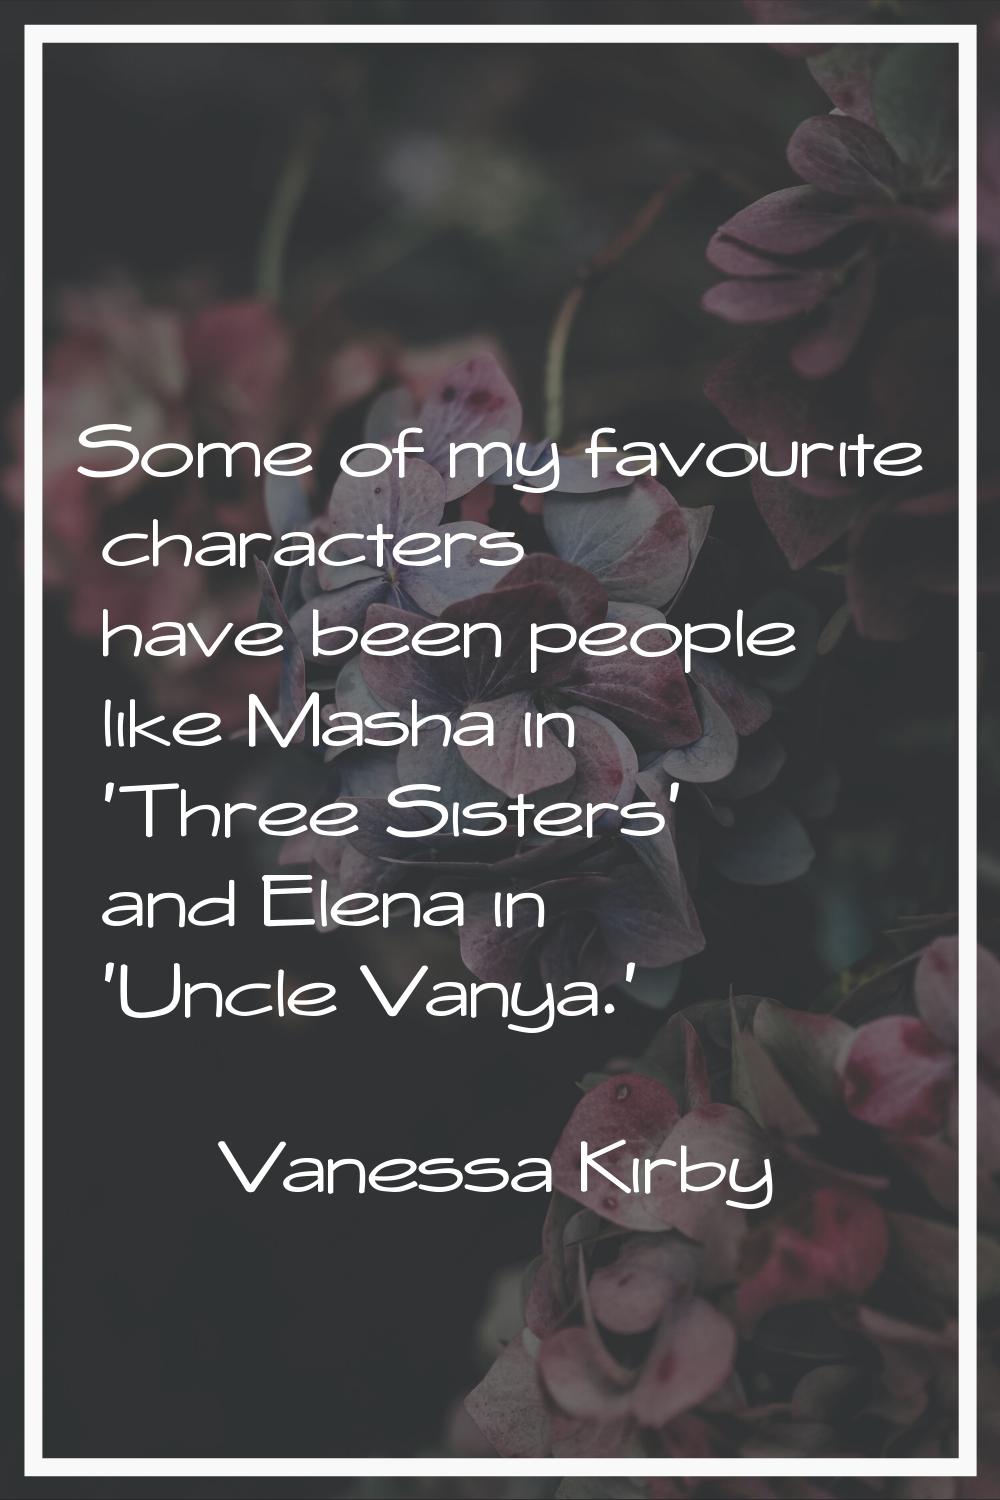 Some of my favourite characters have been people like Masha in 'Three Sisters' and Elena in 'Uncle 